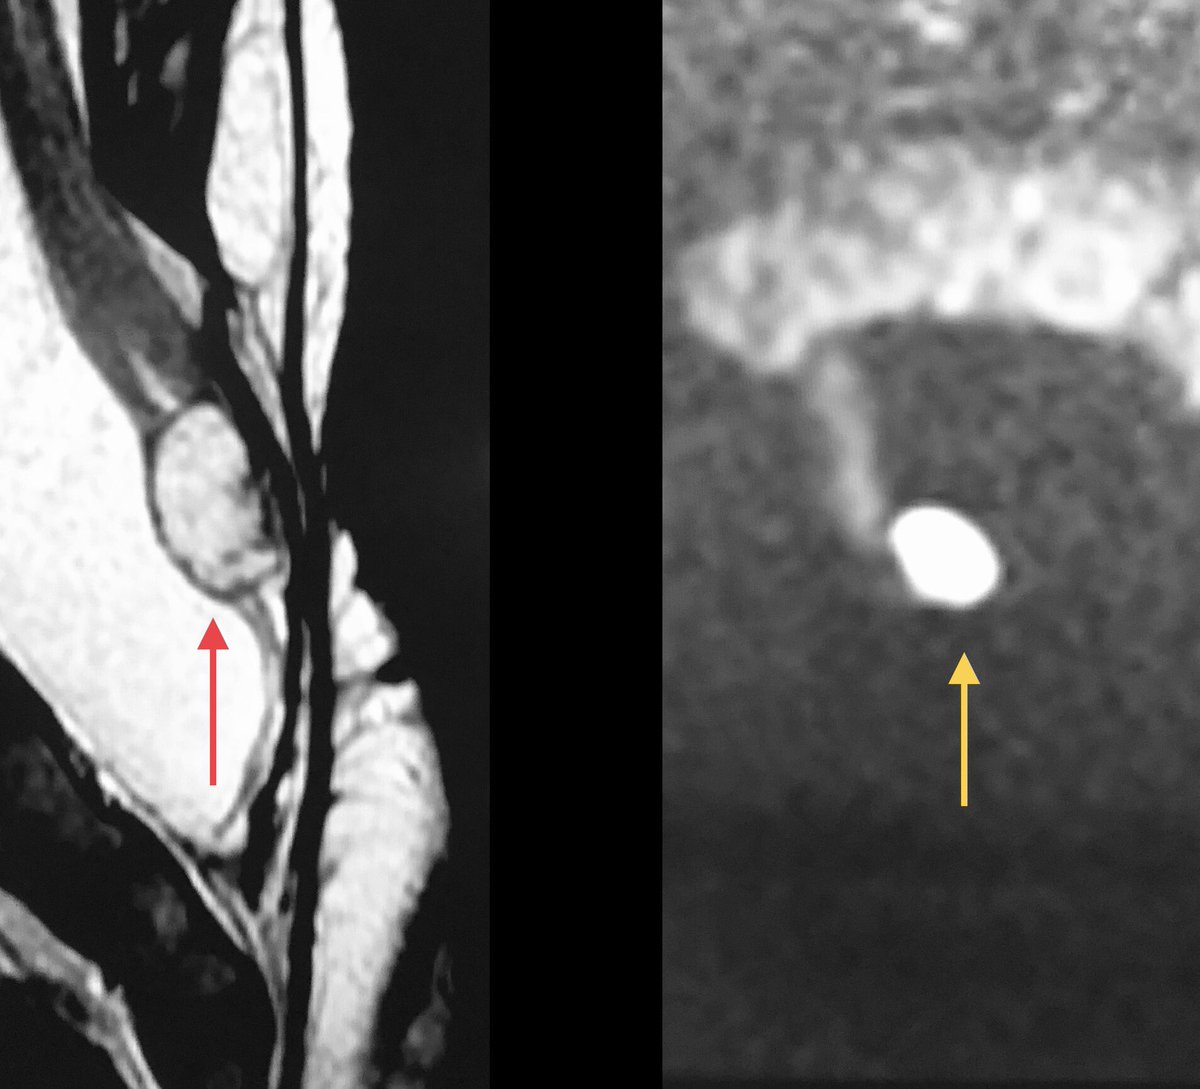 Epidermoid cyst may be found after myelomeningocele repair, showing the typical restricted diffusion nodule 🟡. 
👇
✅It’ s very useful to include DWI in the spinal dysraphism follow-up protocol